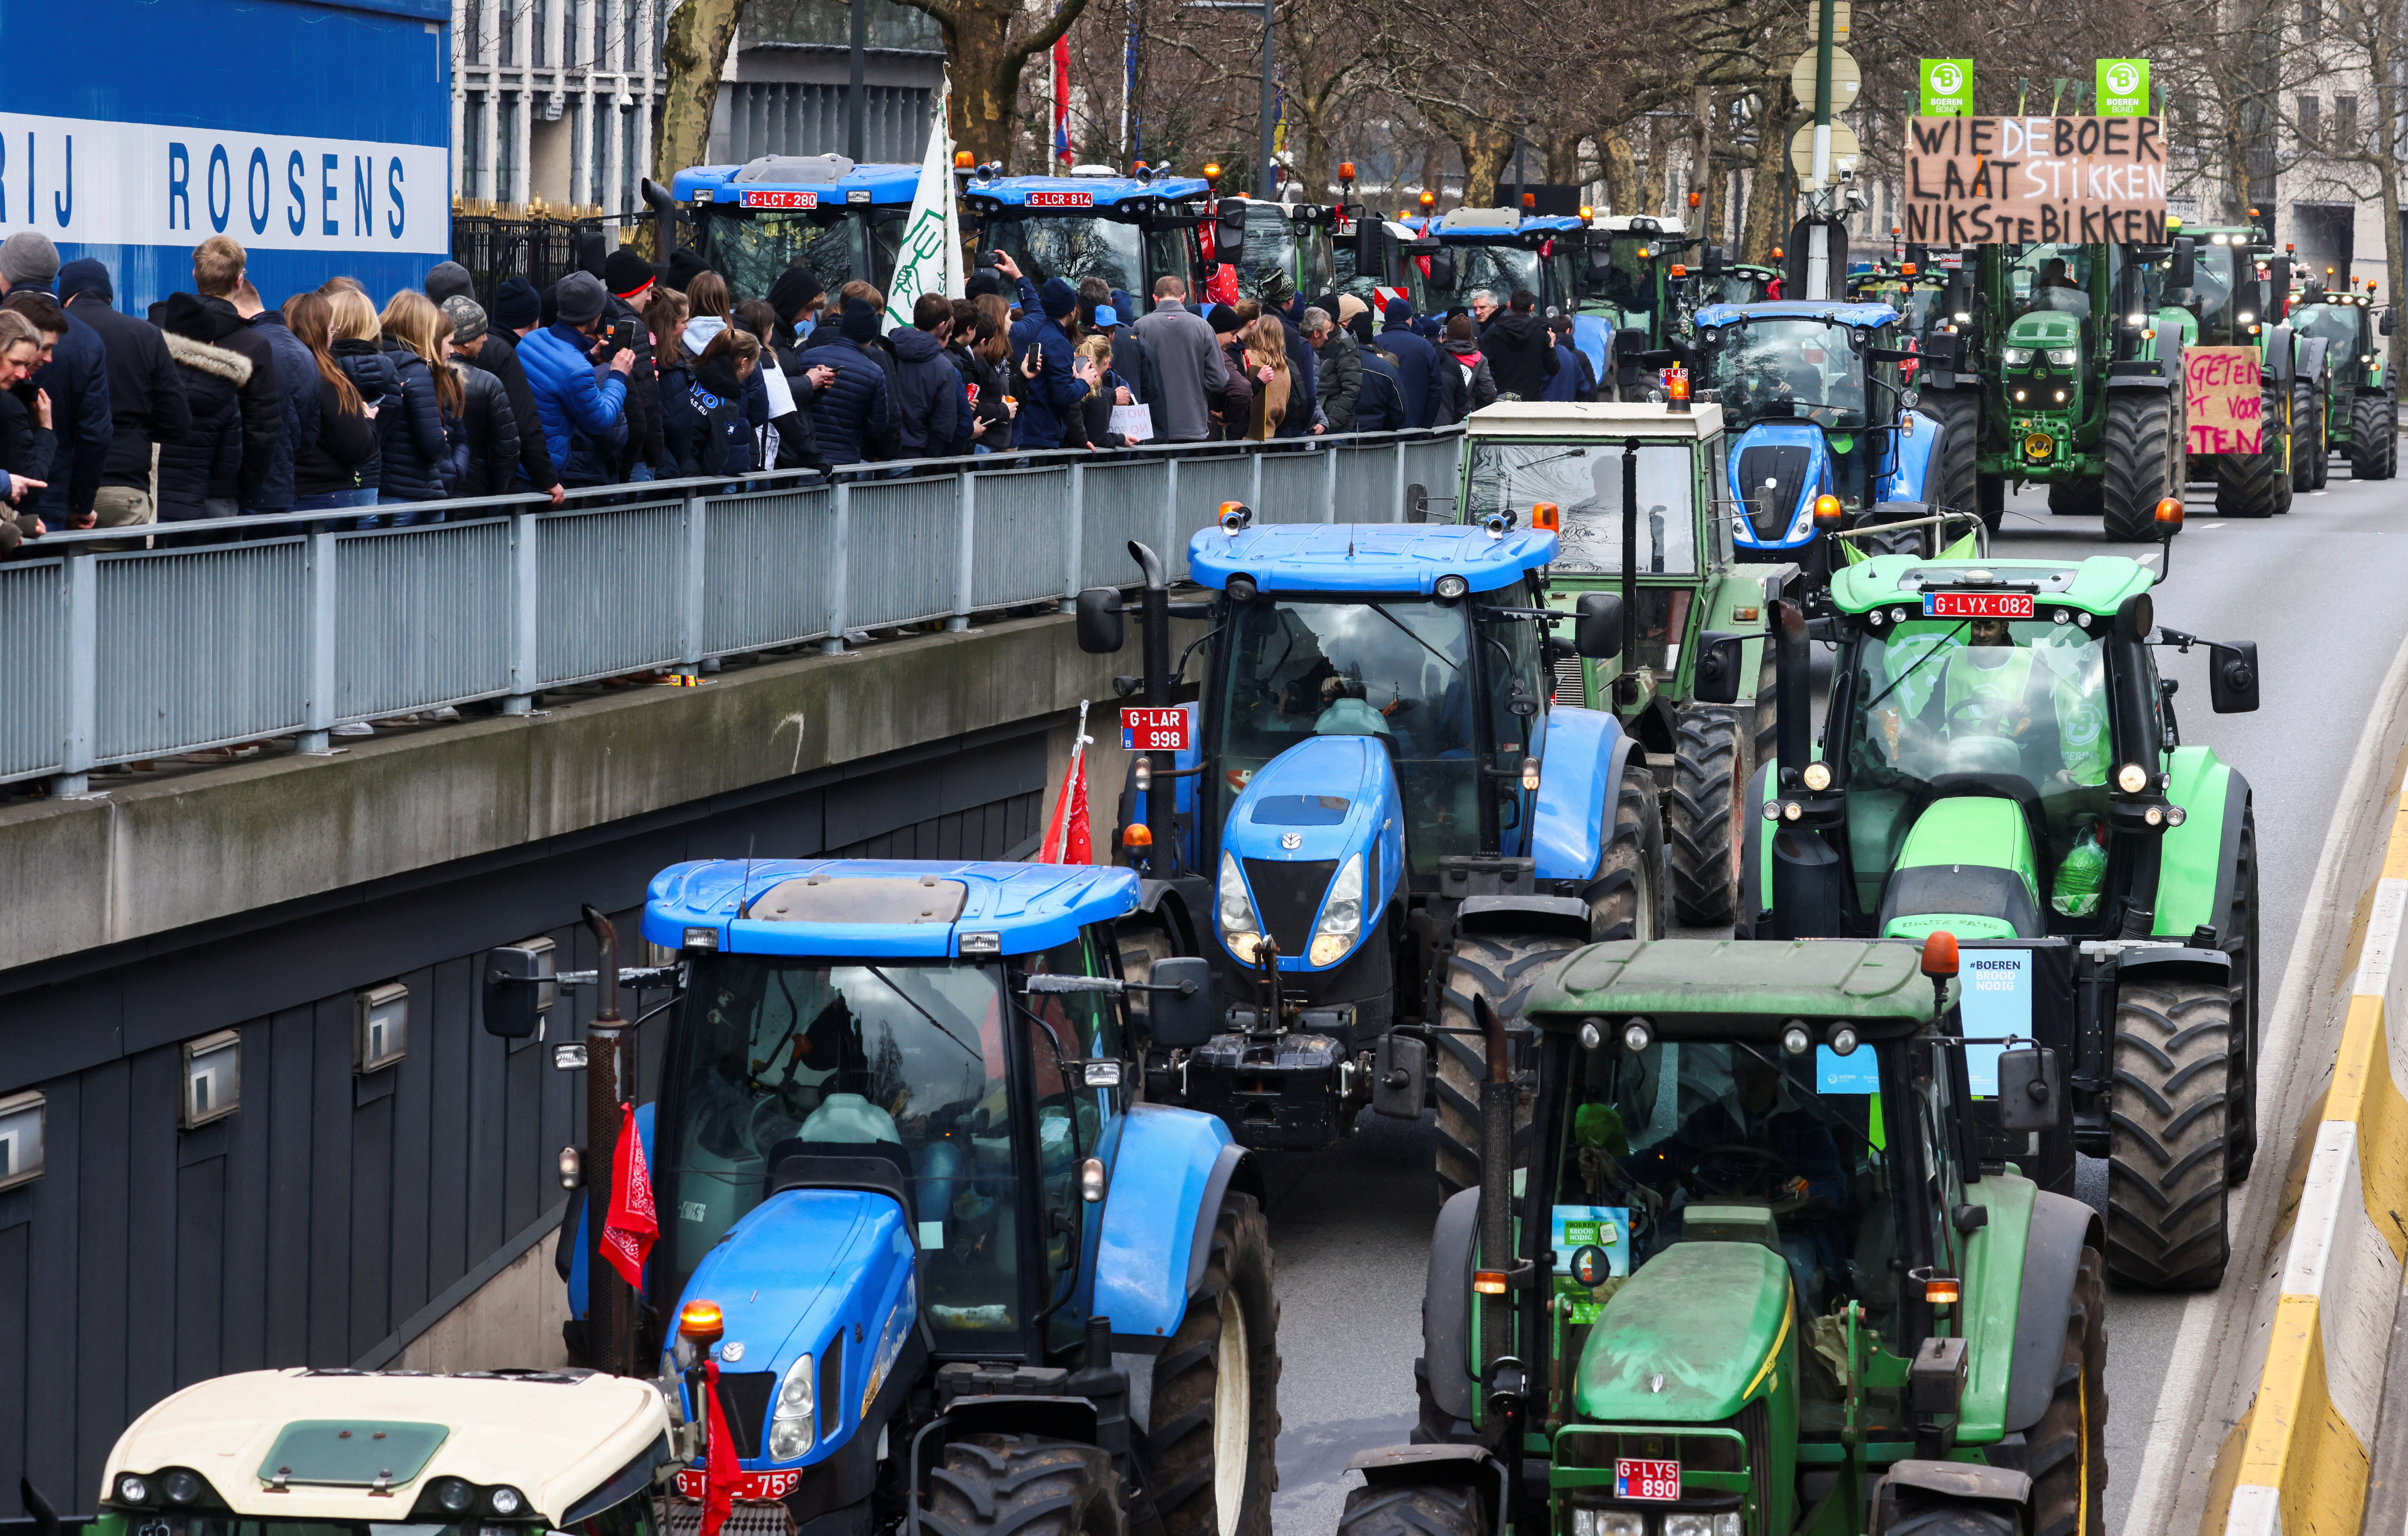 Farmers protest against a new regional government plan to limit nitrogen emissions, in Brussels